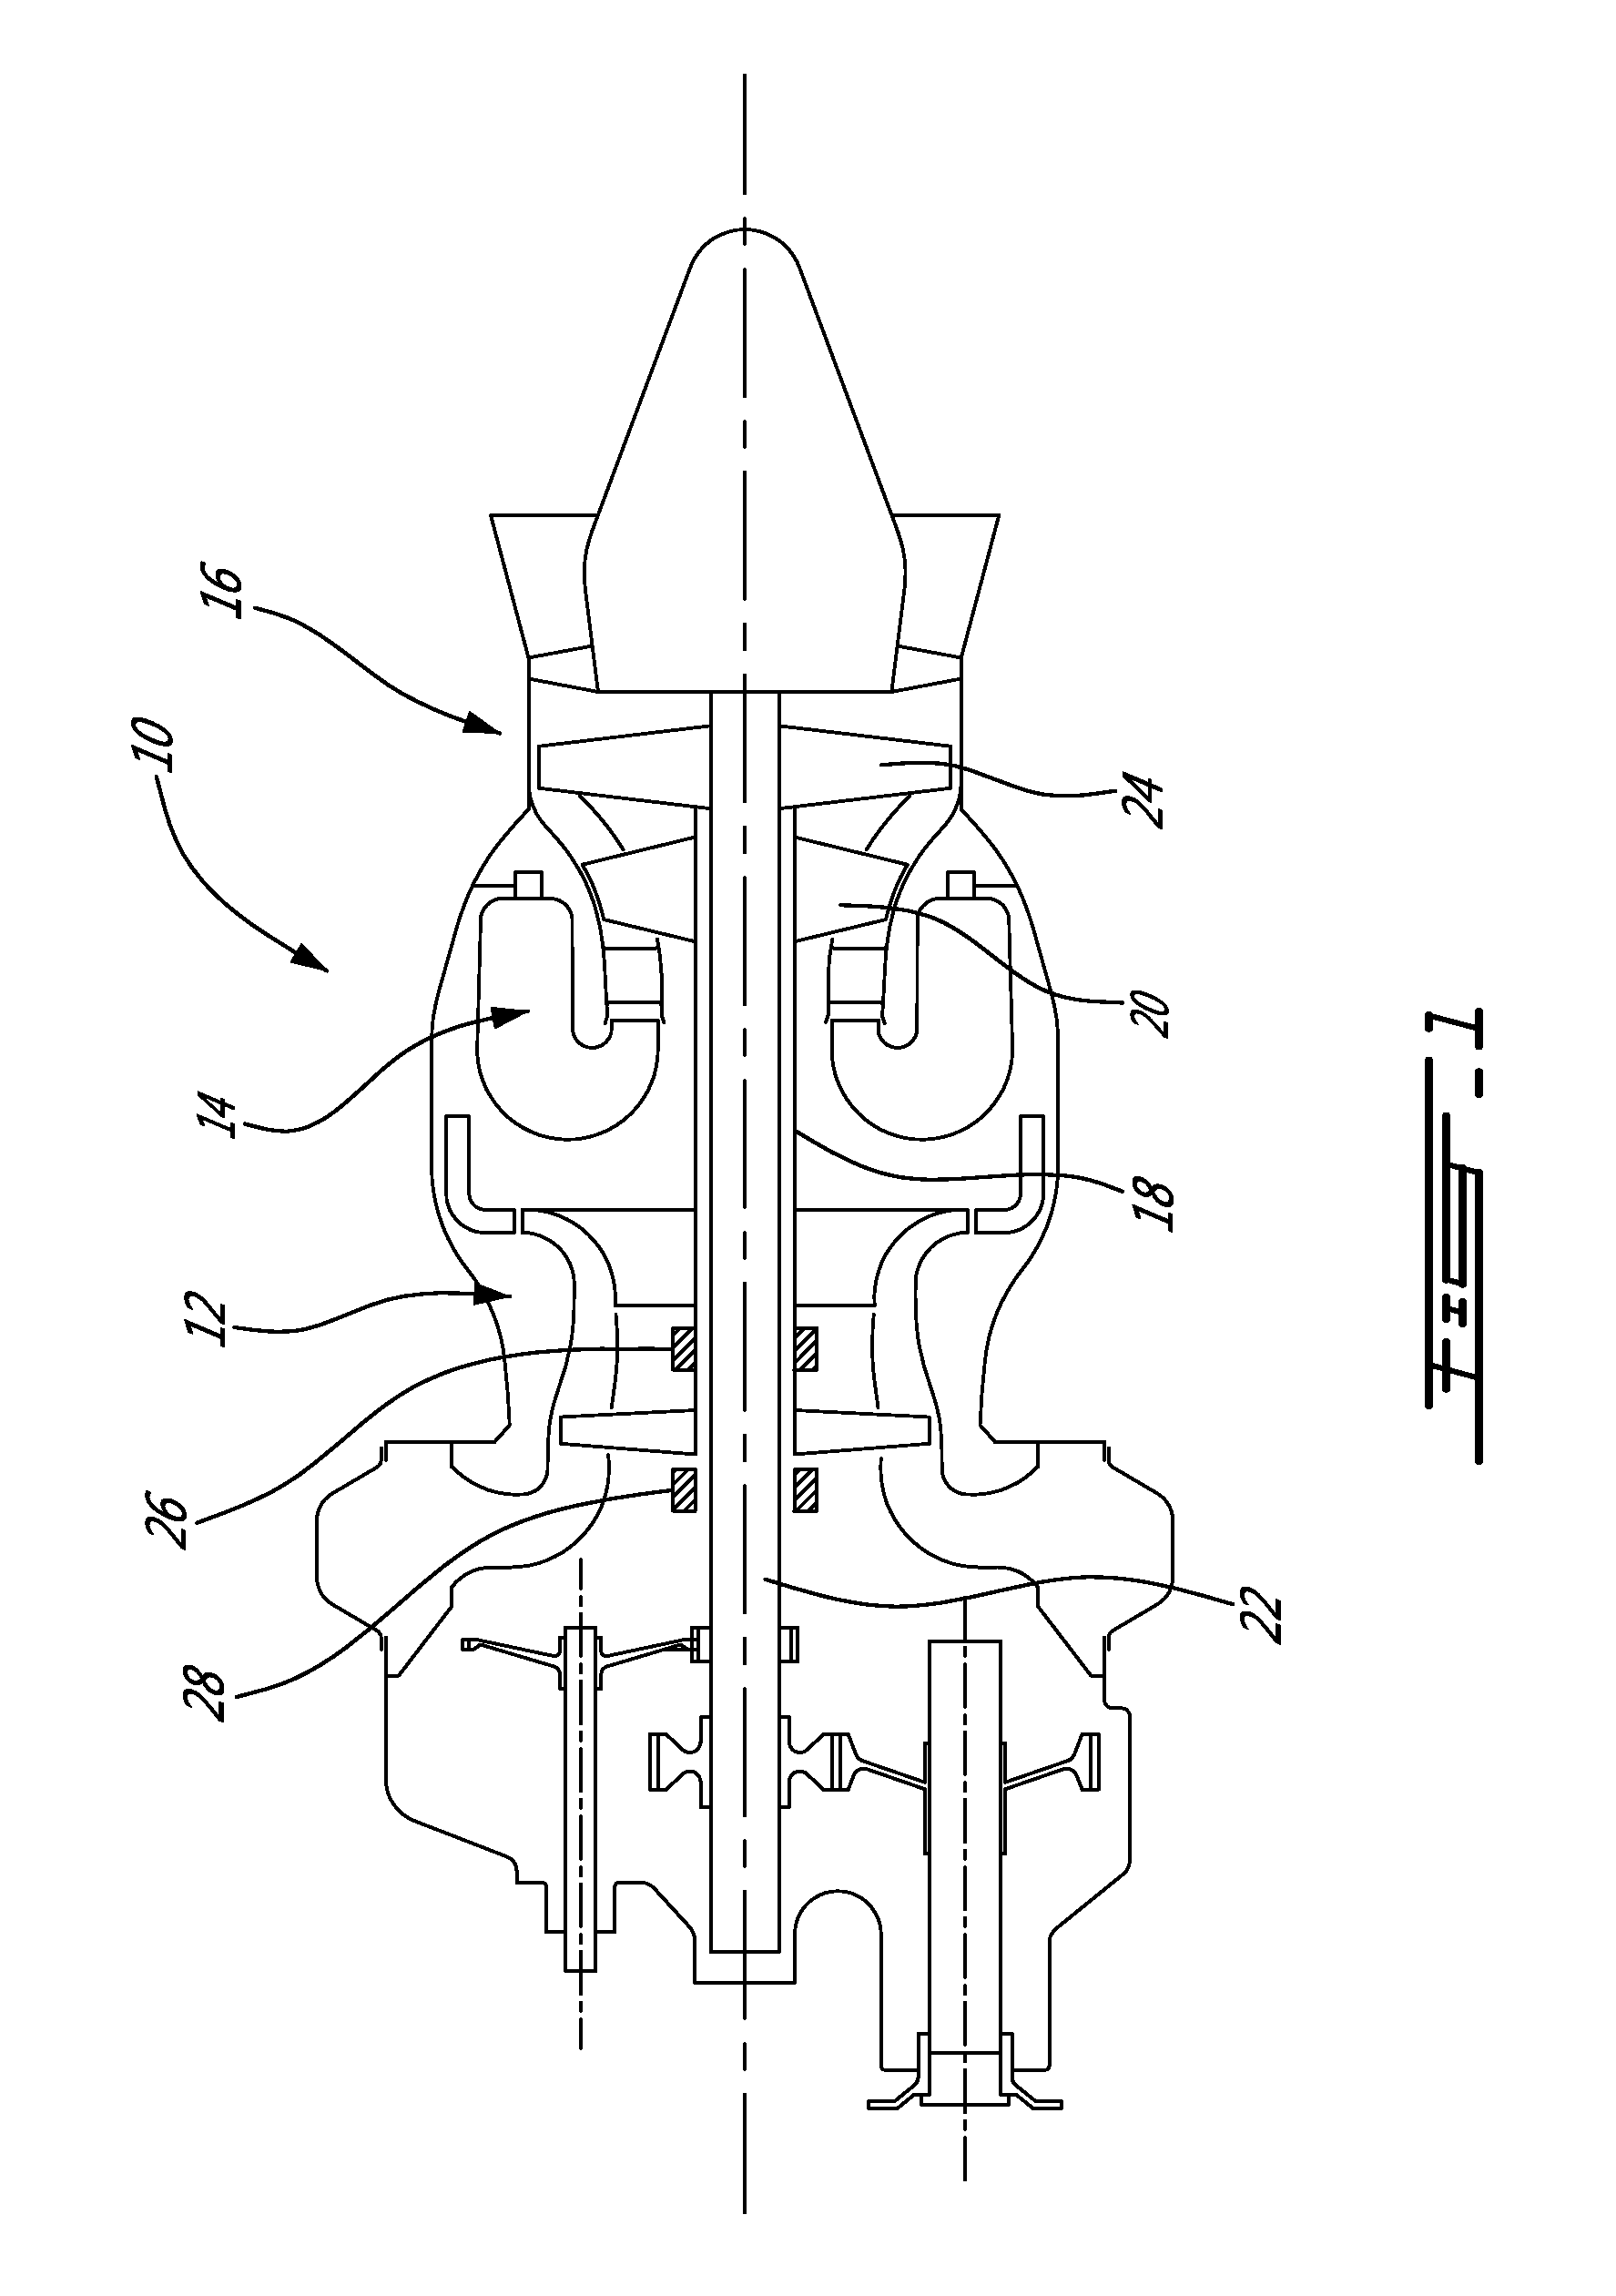 Multiple turboshaft engine control method and system for helicopters